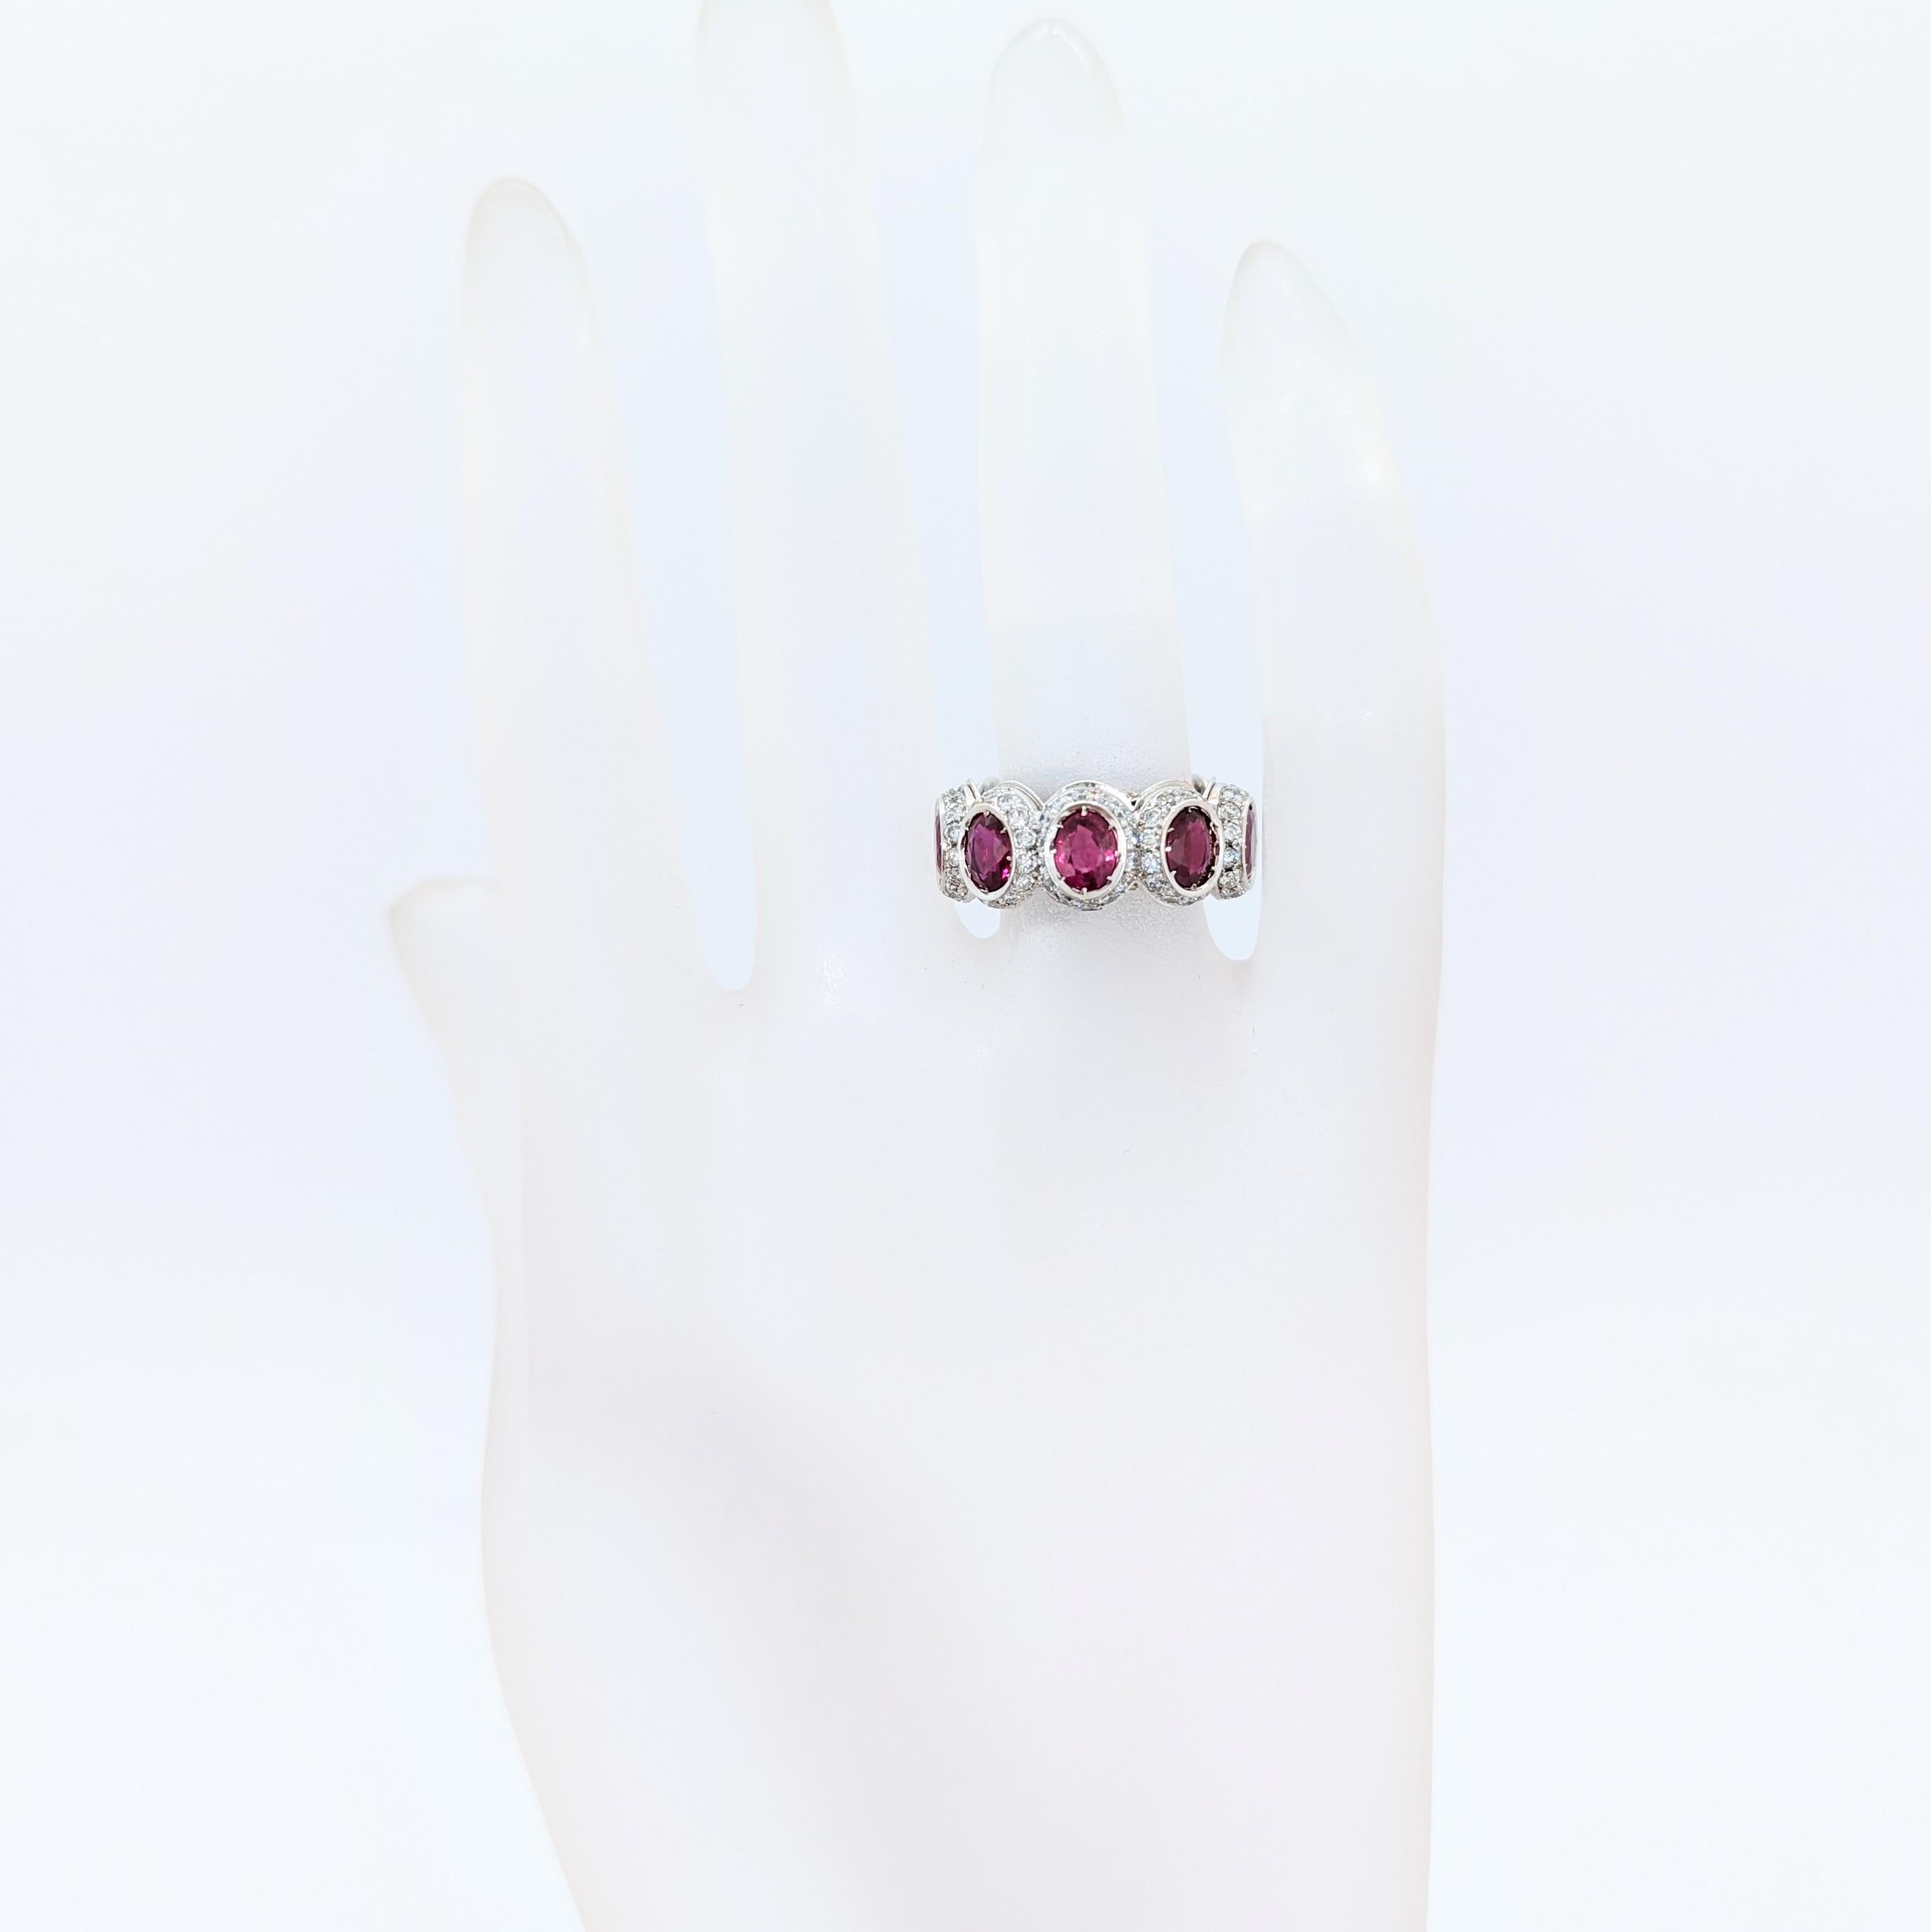 Beautiful 5.50 ct. ruby oval with 1.85 ct. good quality white diamond rounds.  Handmade in 18k white gold.  Ring size 5.75.